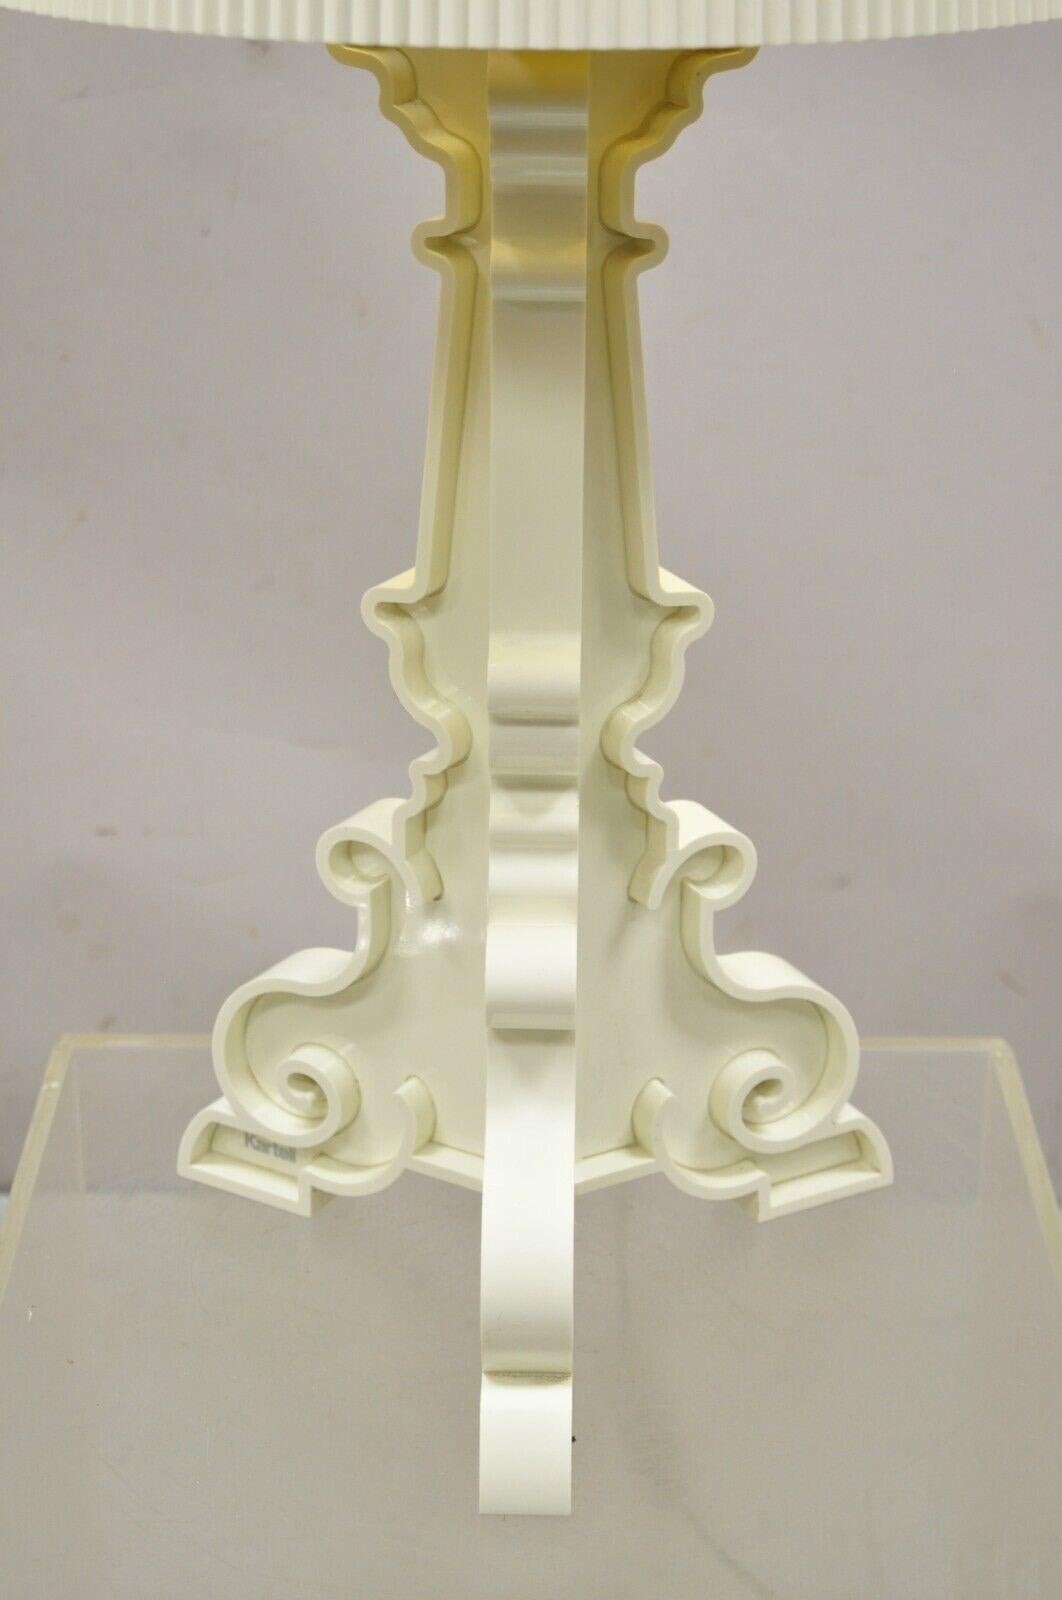 Plastic Kartell Ferruccio Laviani Bourgie White Baroque Table Lamp with Shade For Sale